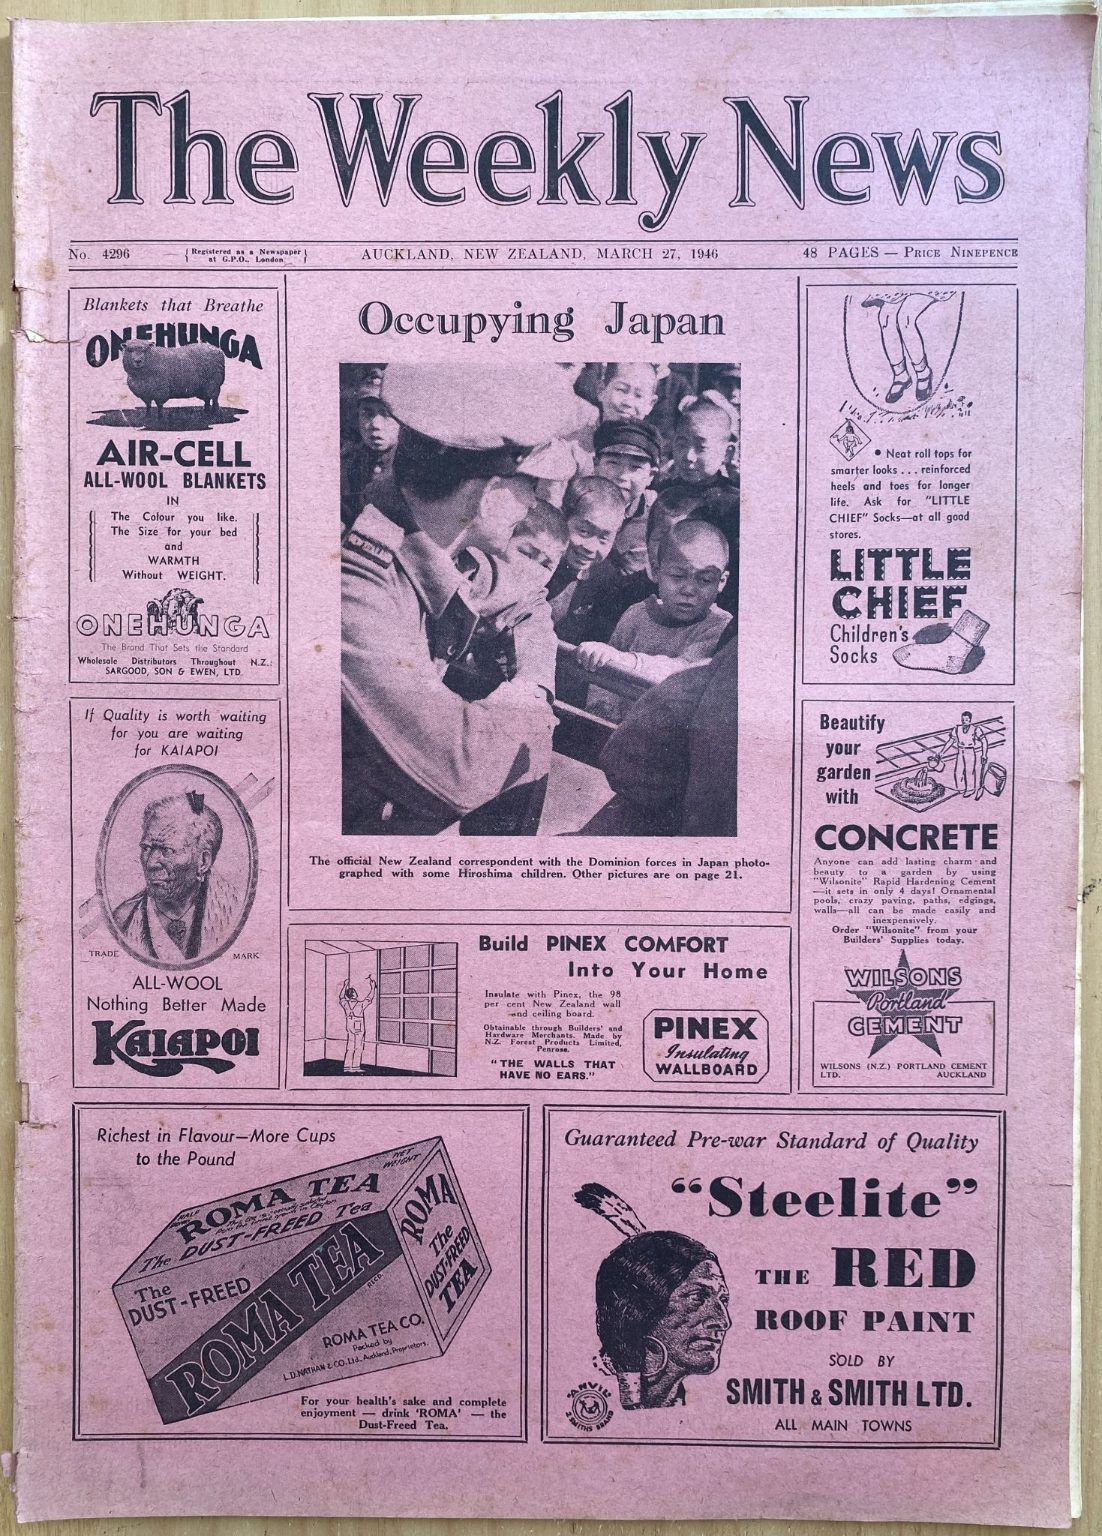 OLD NEWSPAPER: The Weekly News - No. 4296, 27 March 1946